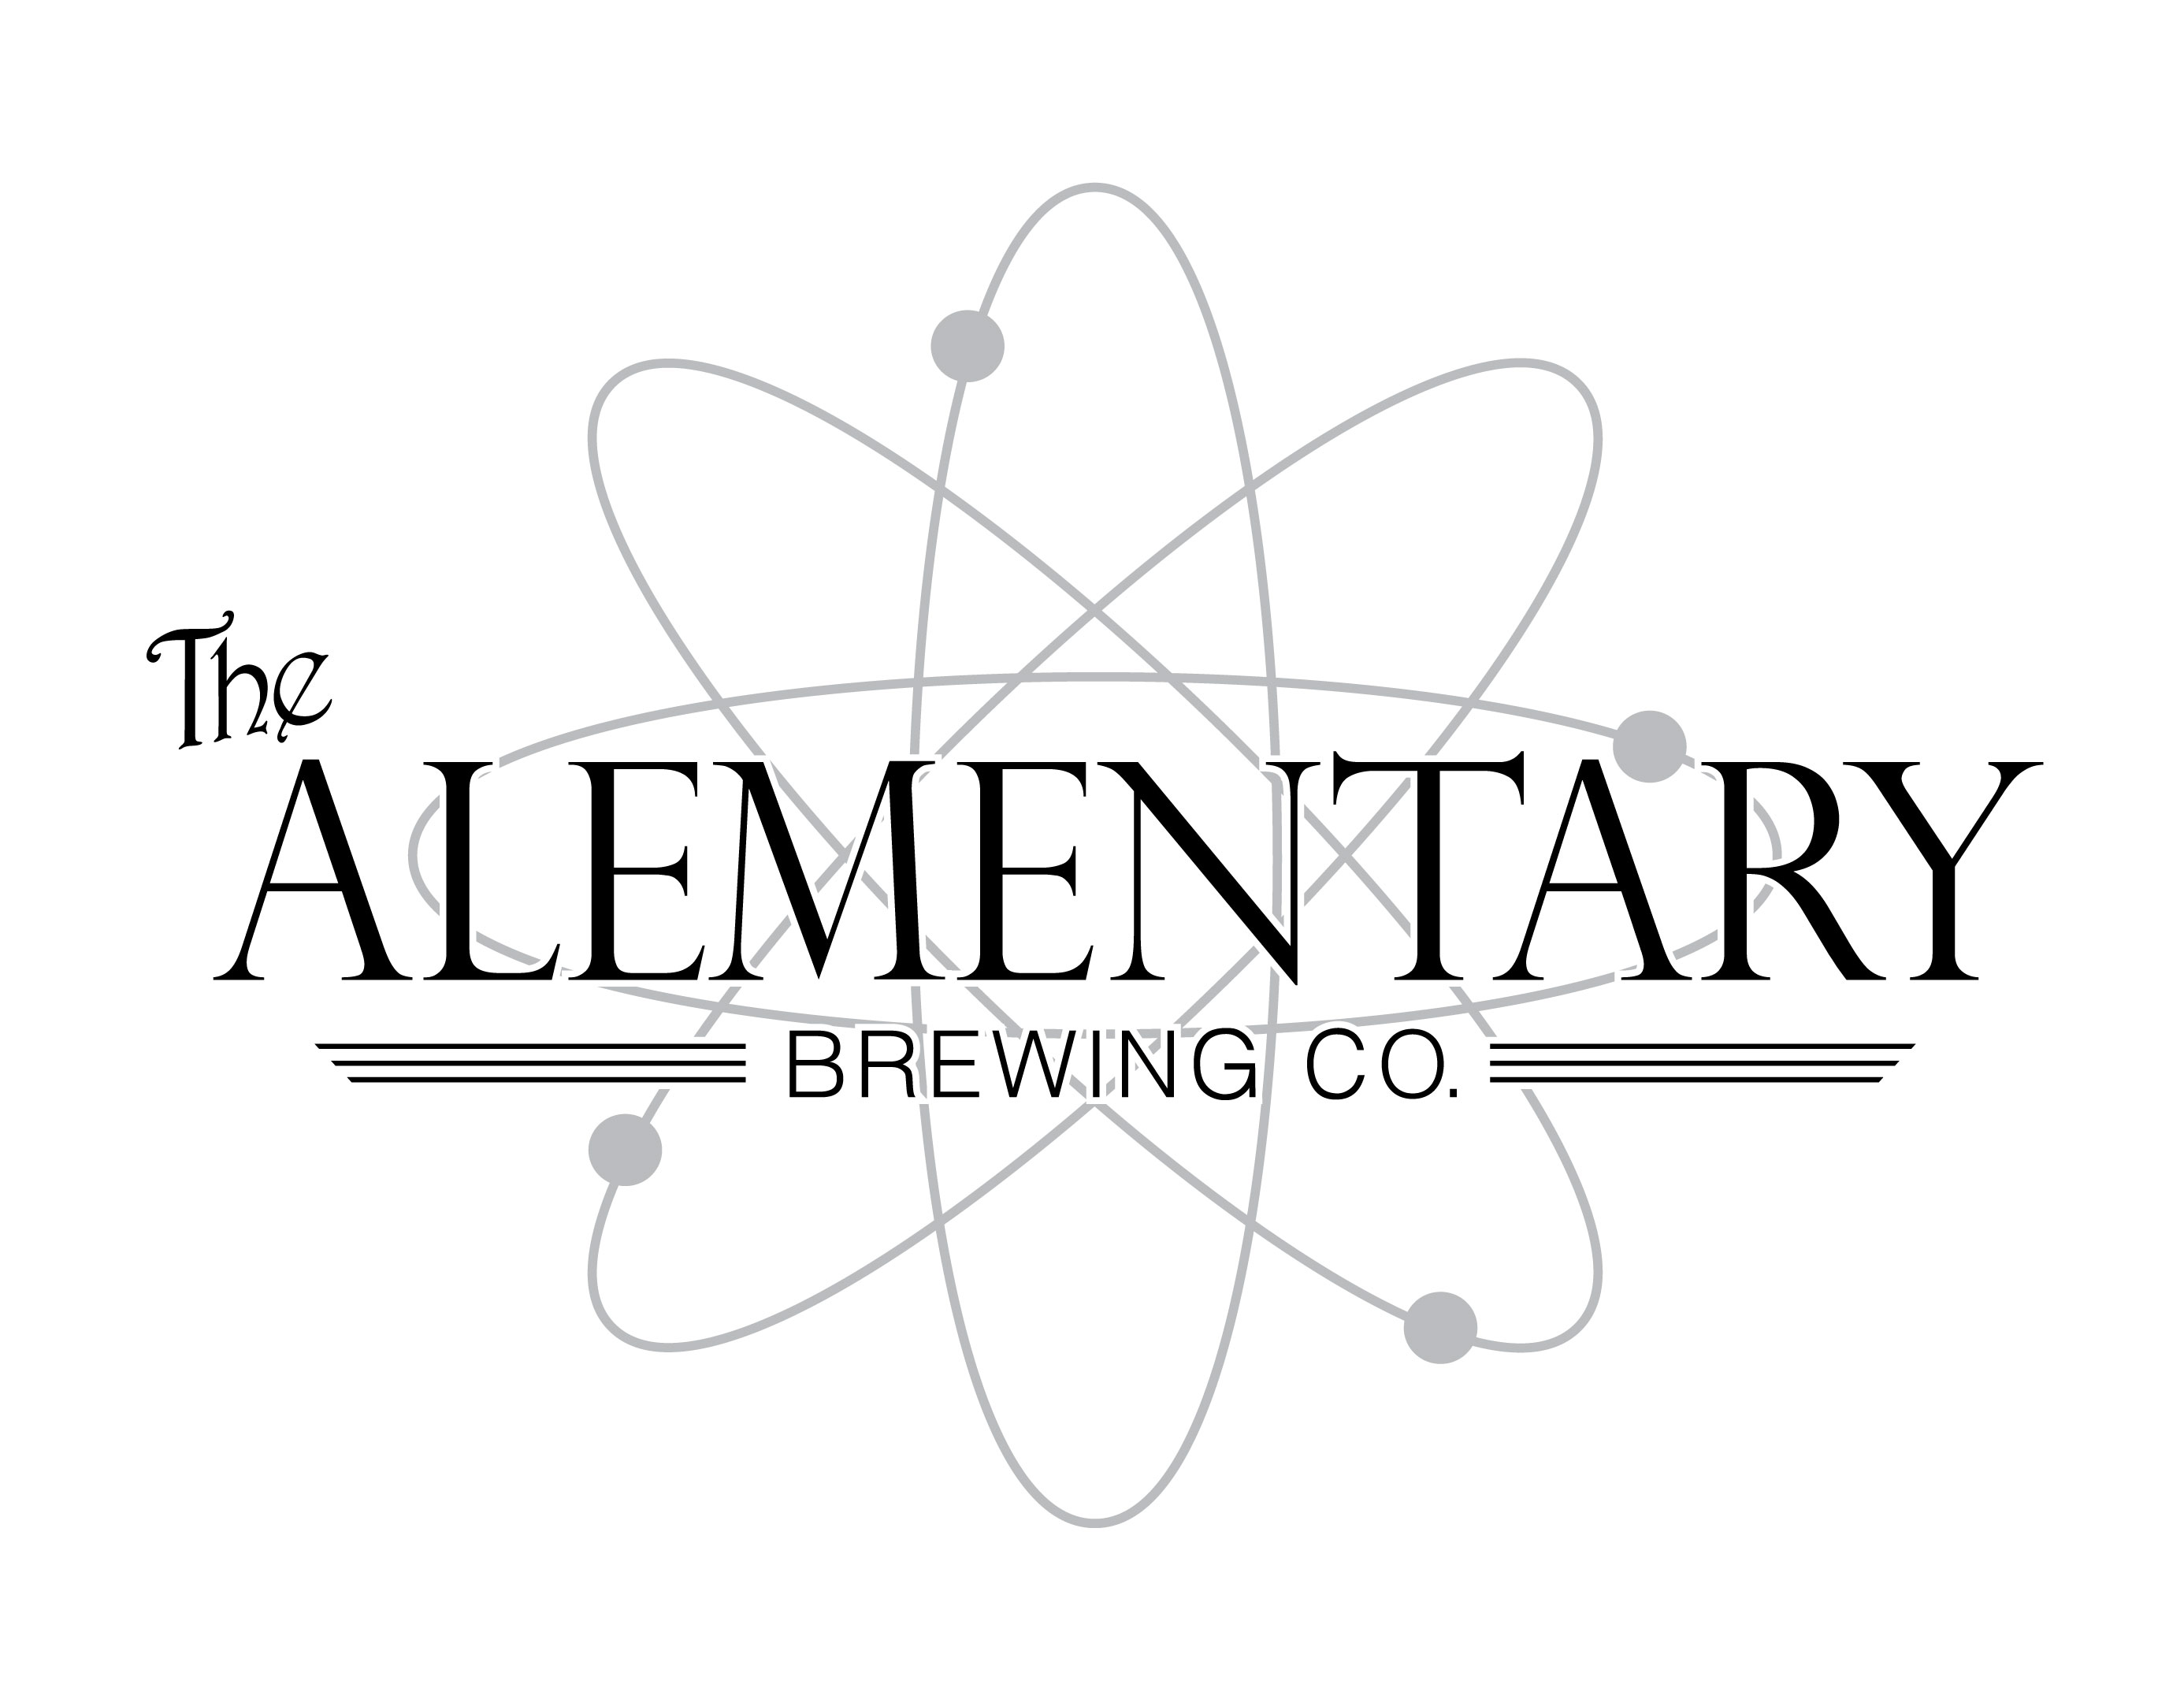 The Alementary Brewing Co